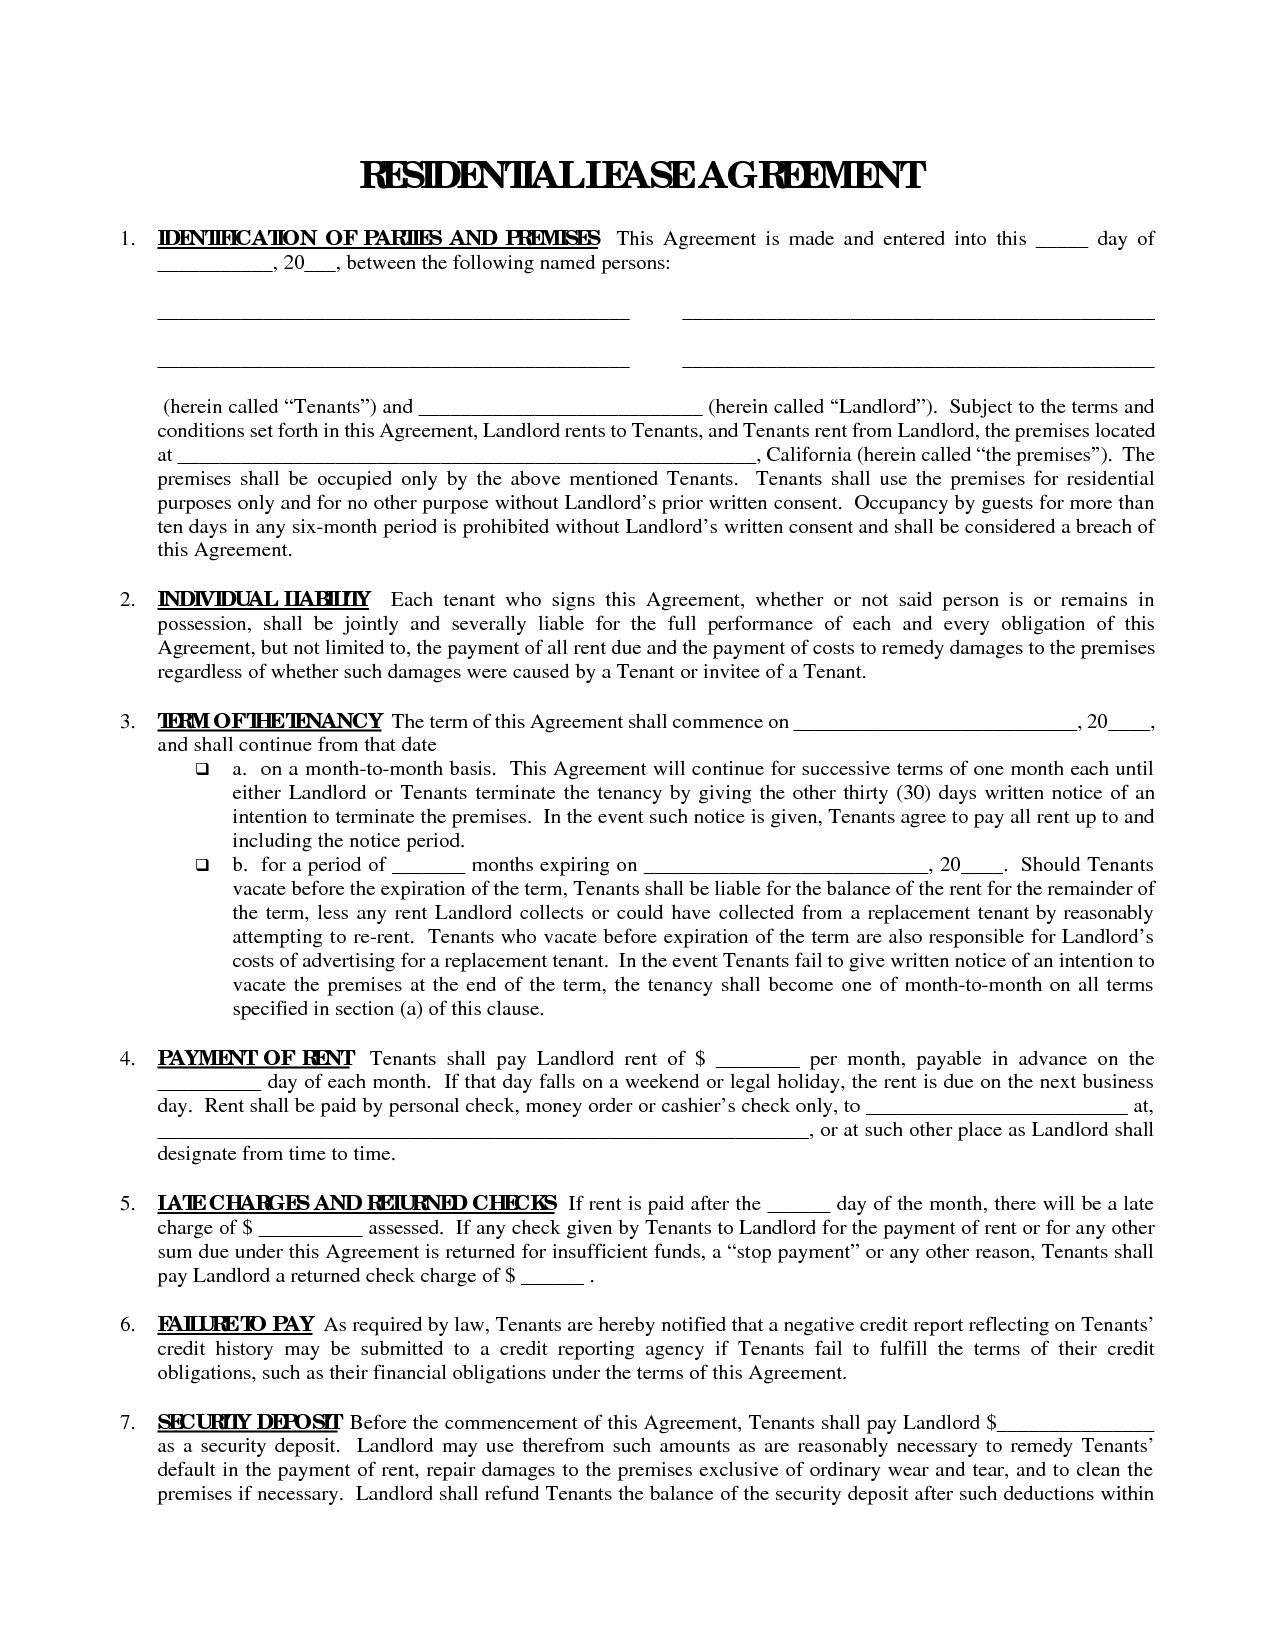 Printable Residential Free House Lease Agreement | Residential Lease - Free Printable Landlord Forms